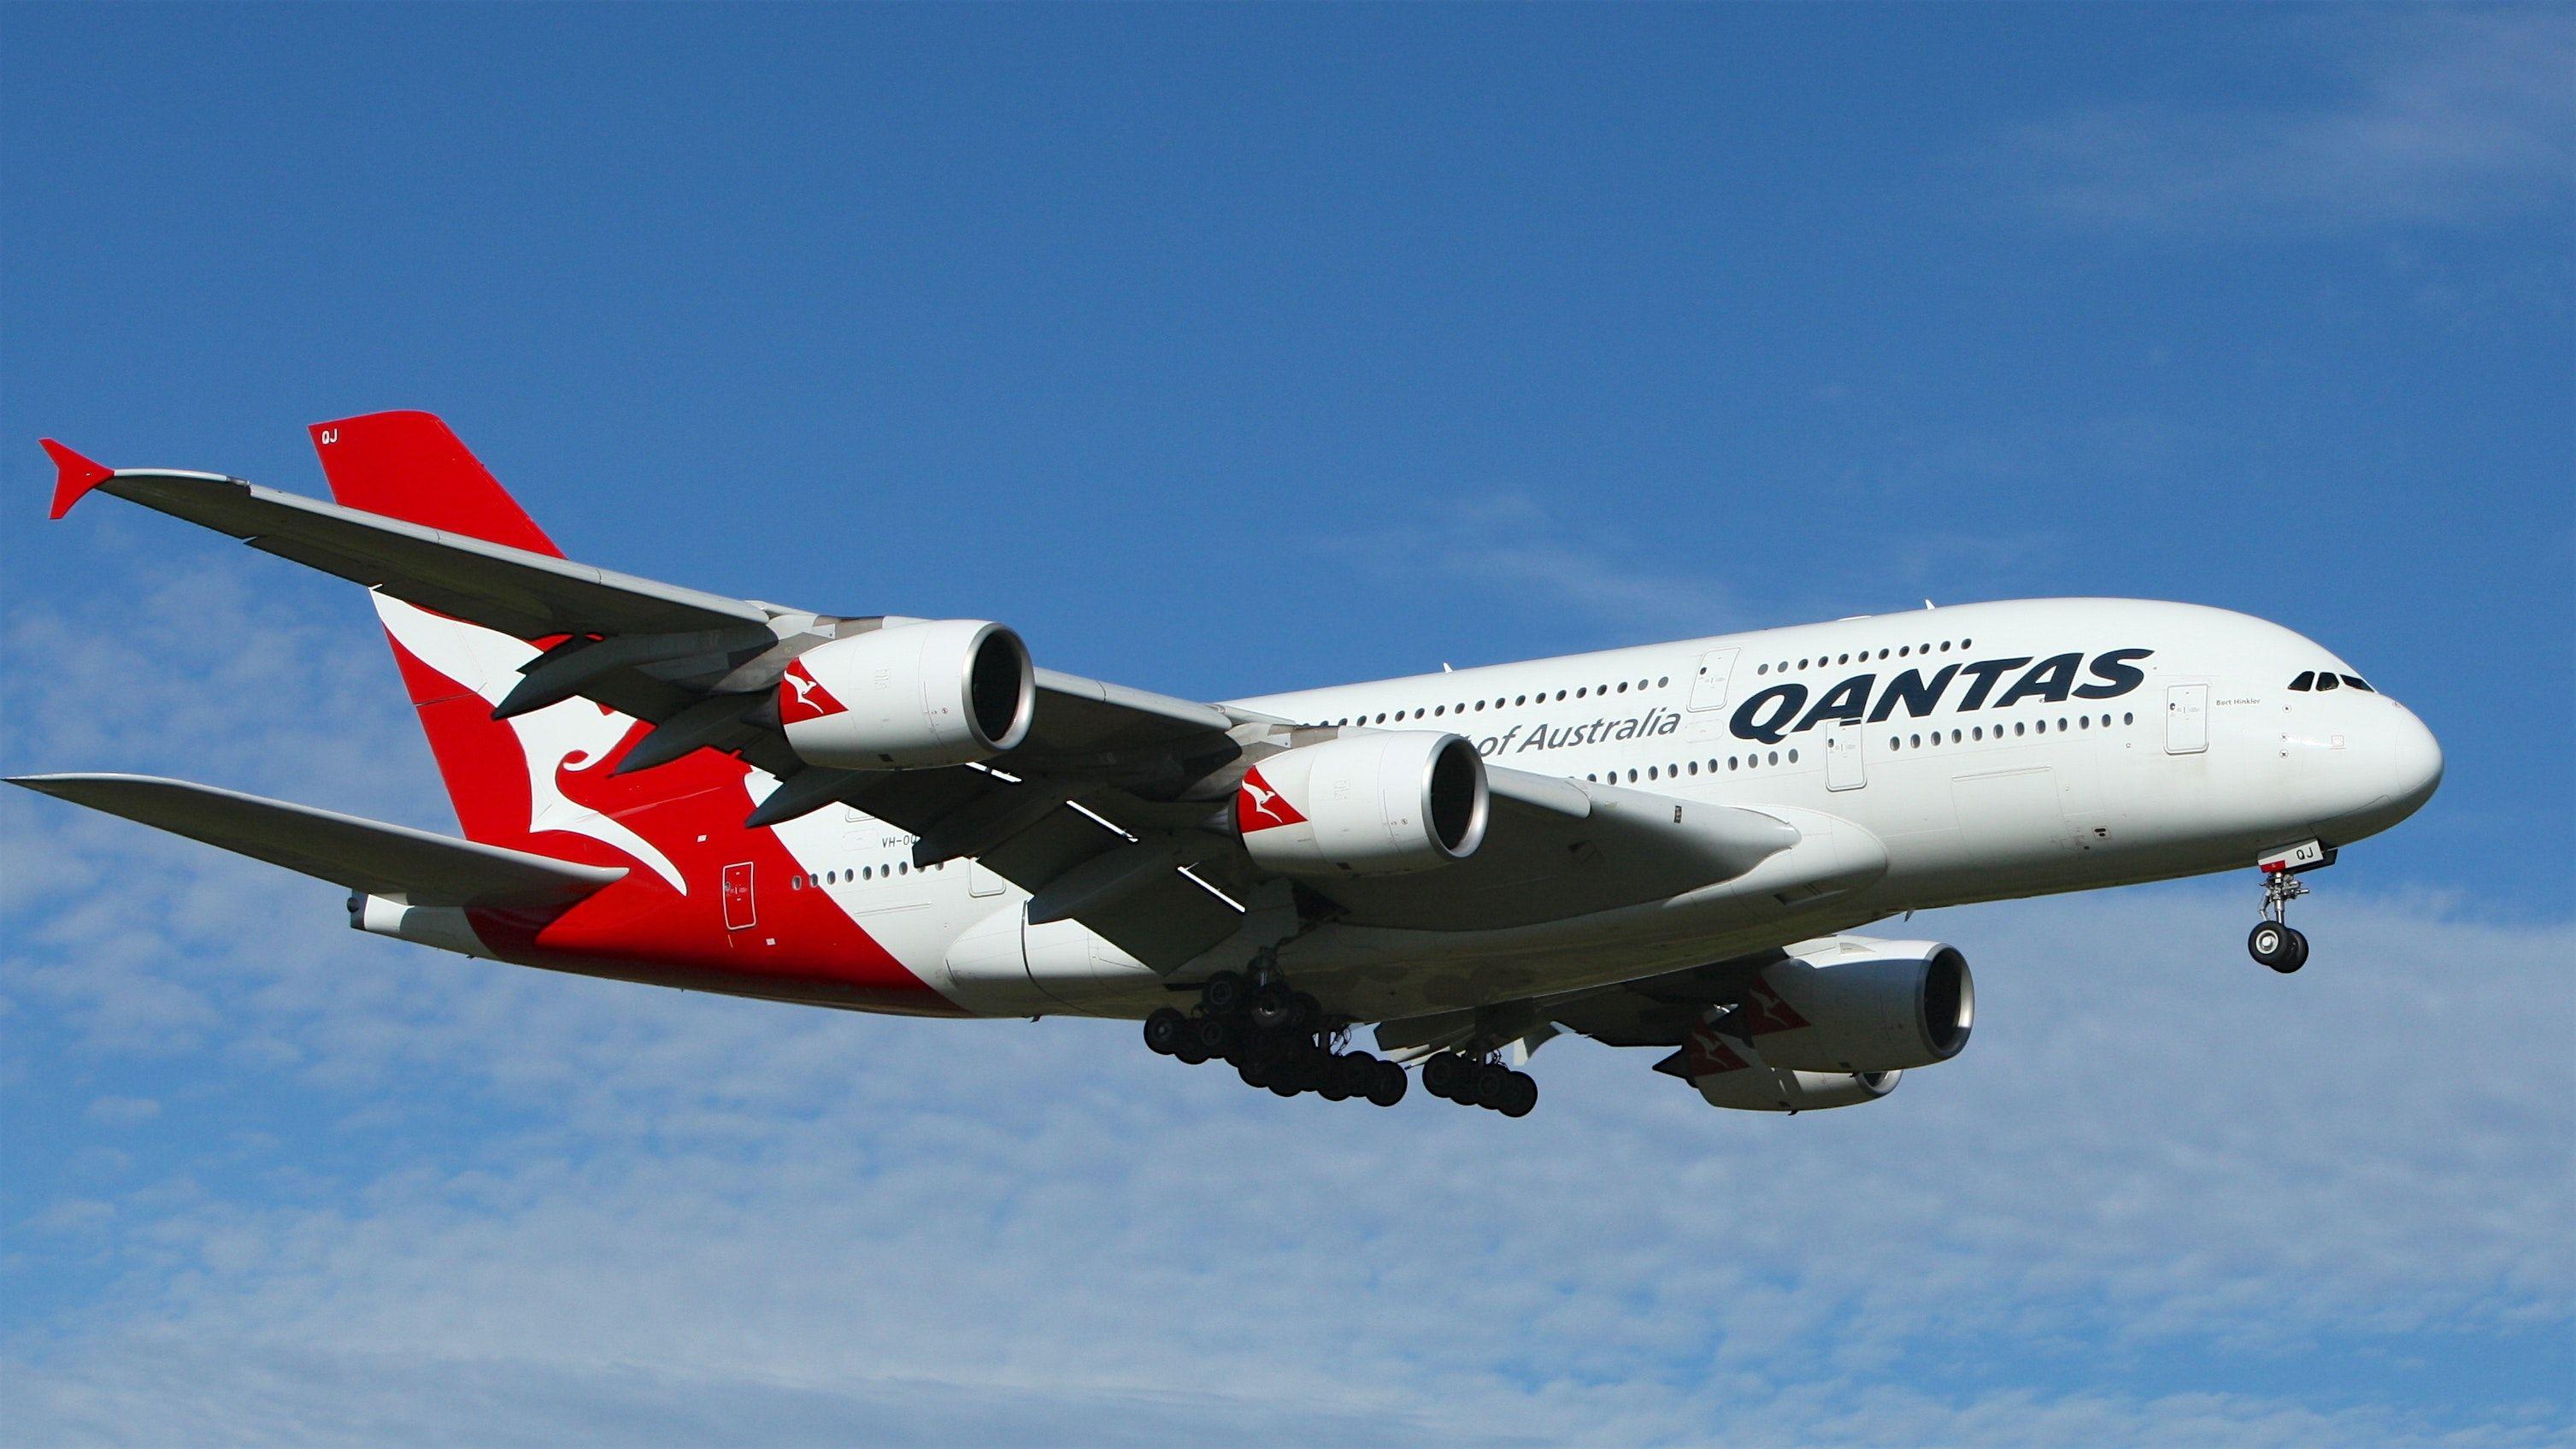 White and Red Airline Logo - White and Red Qantas Airplane Fly High Under Blue and White Clouds ...